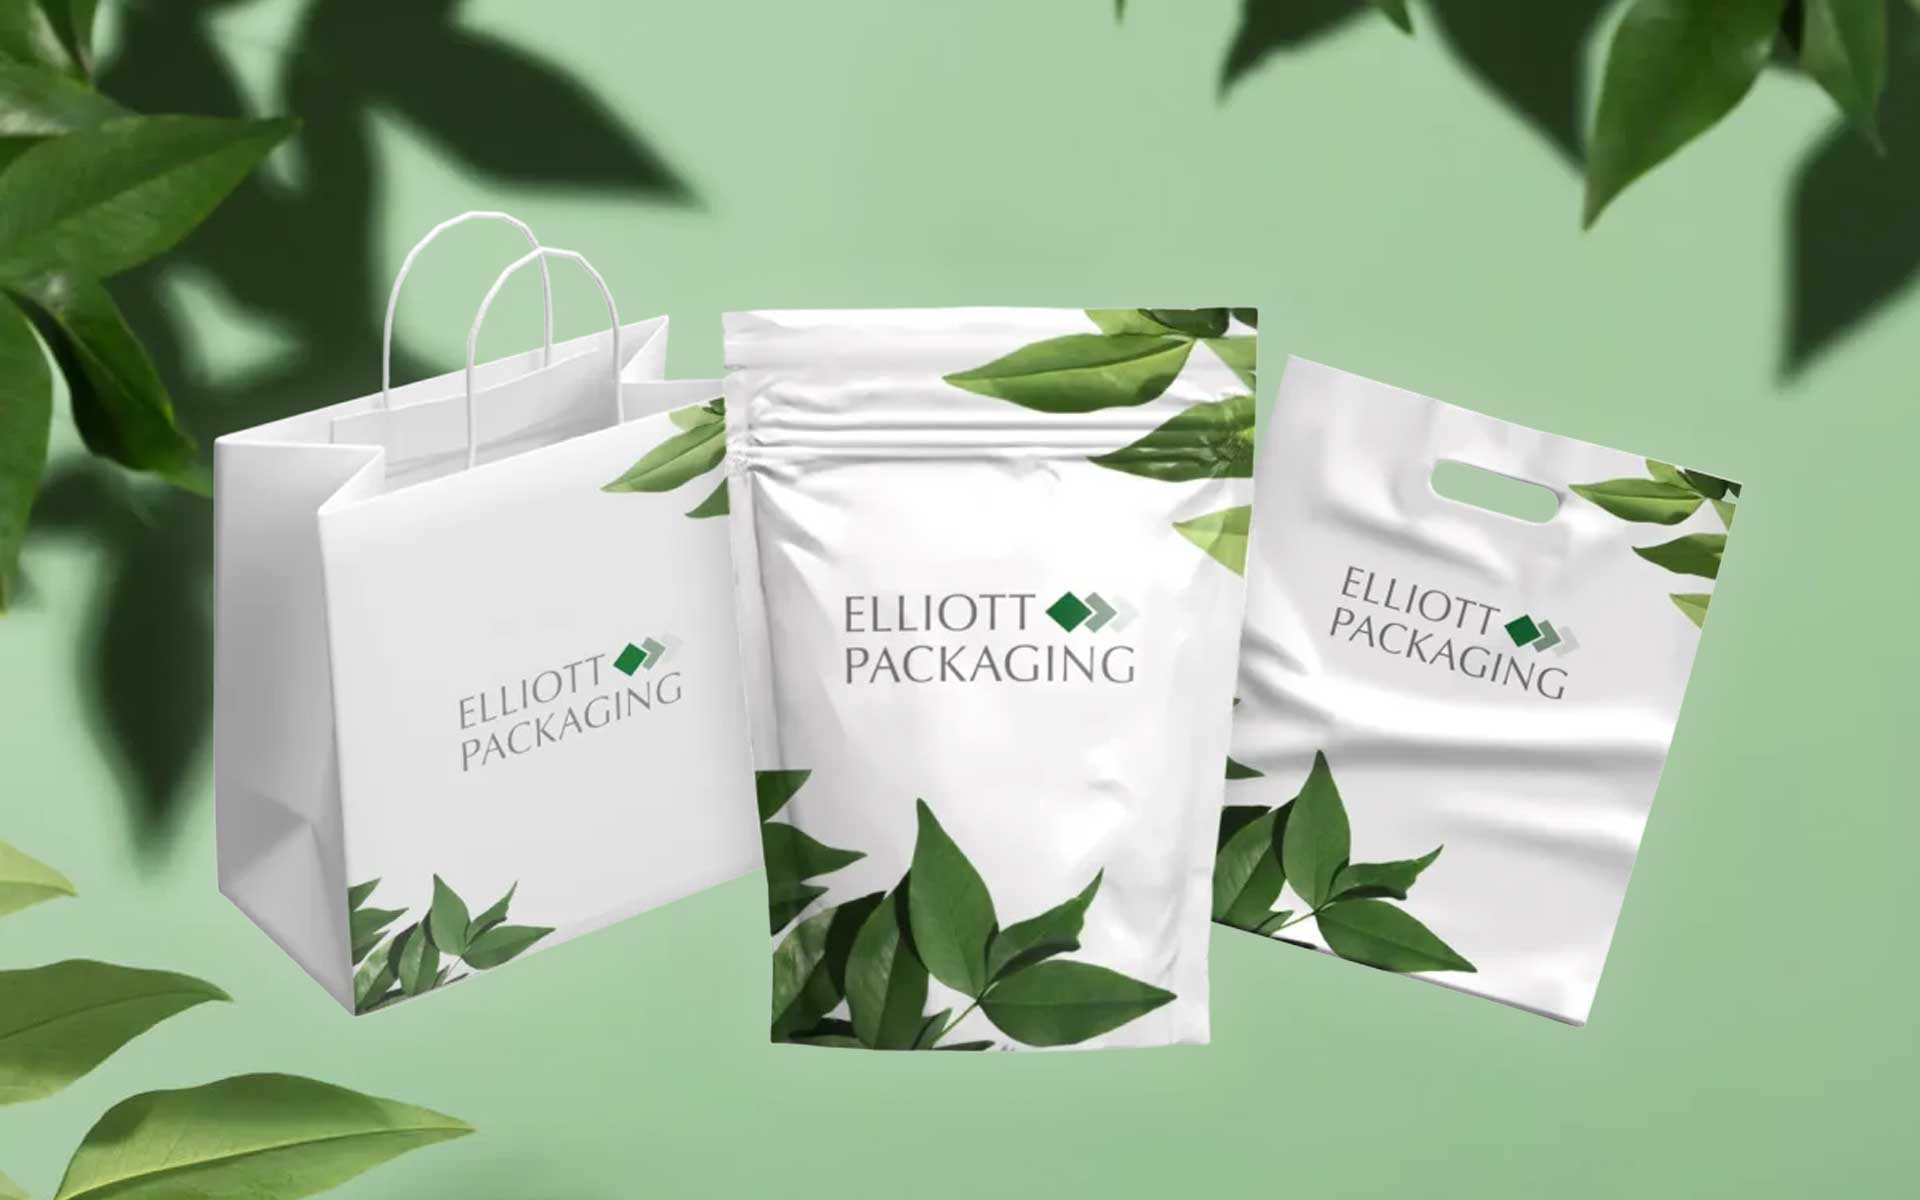 Elliott packaging, your eco-friendly packaging supplier